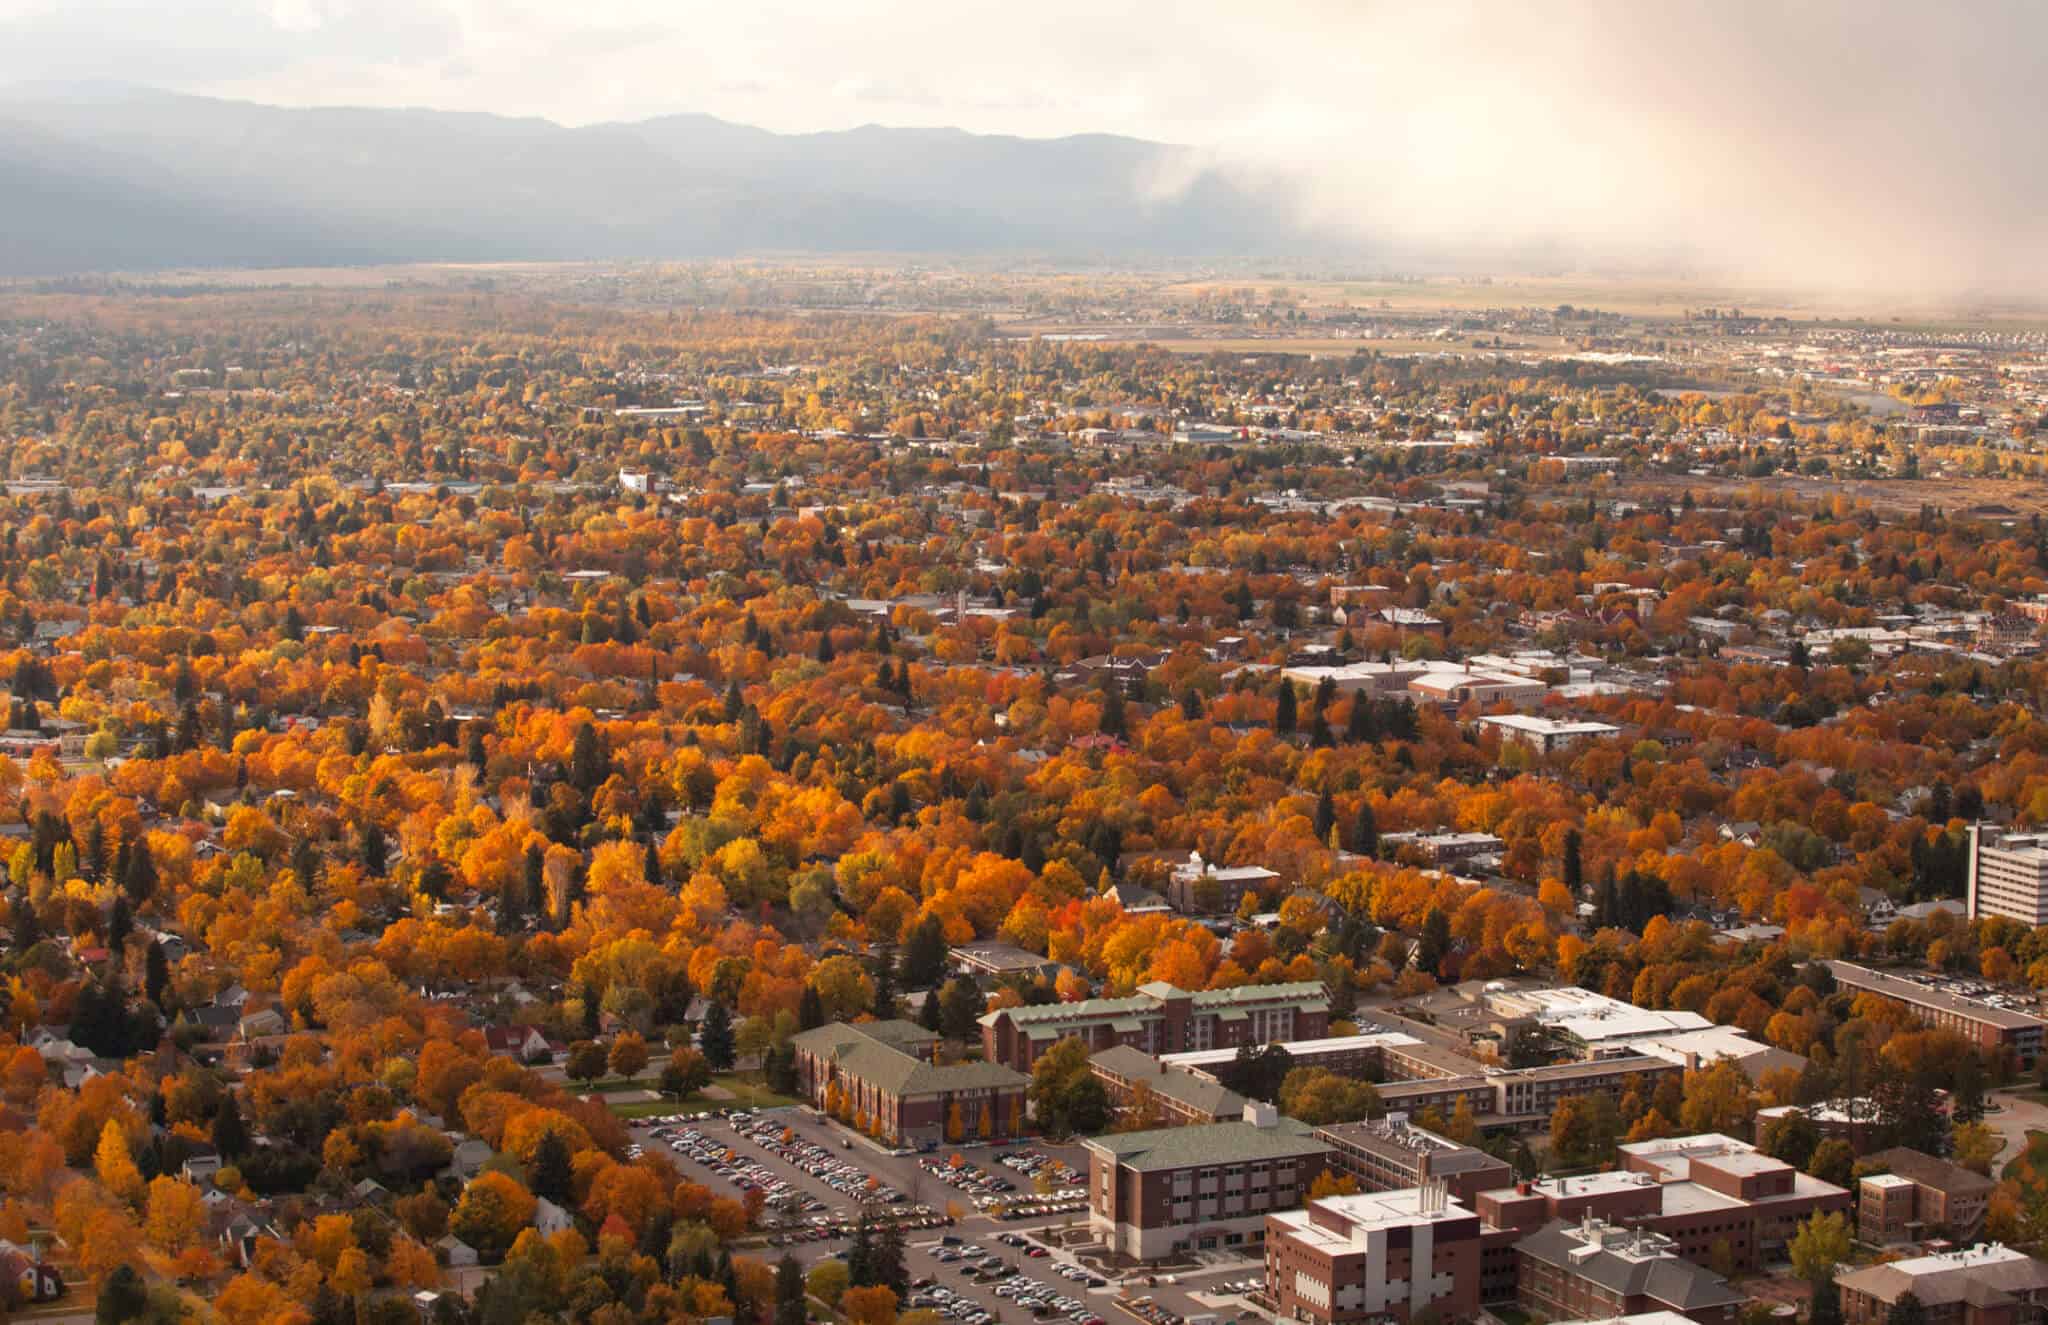 The colorful town of Missoula, Montana.